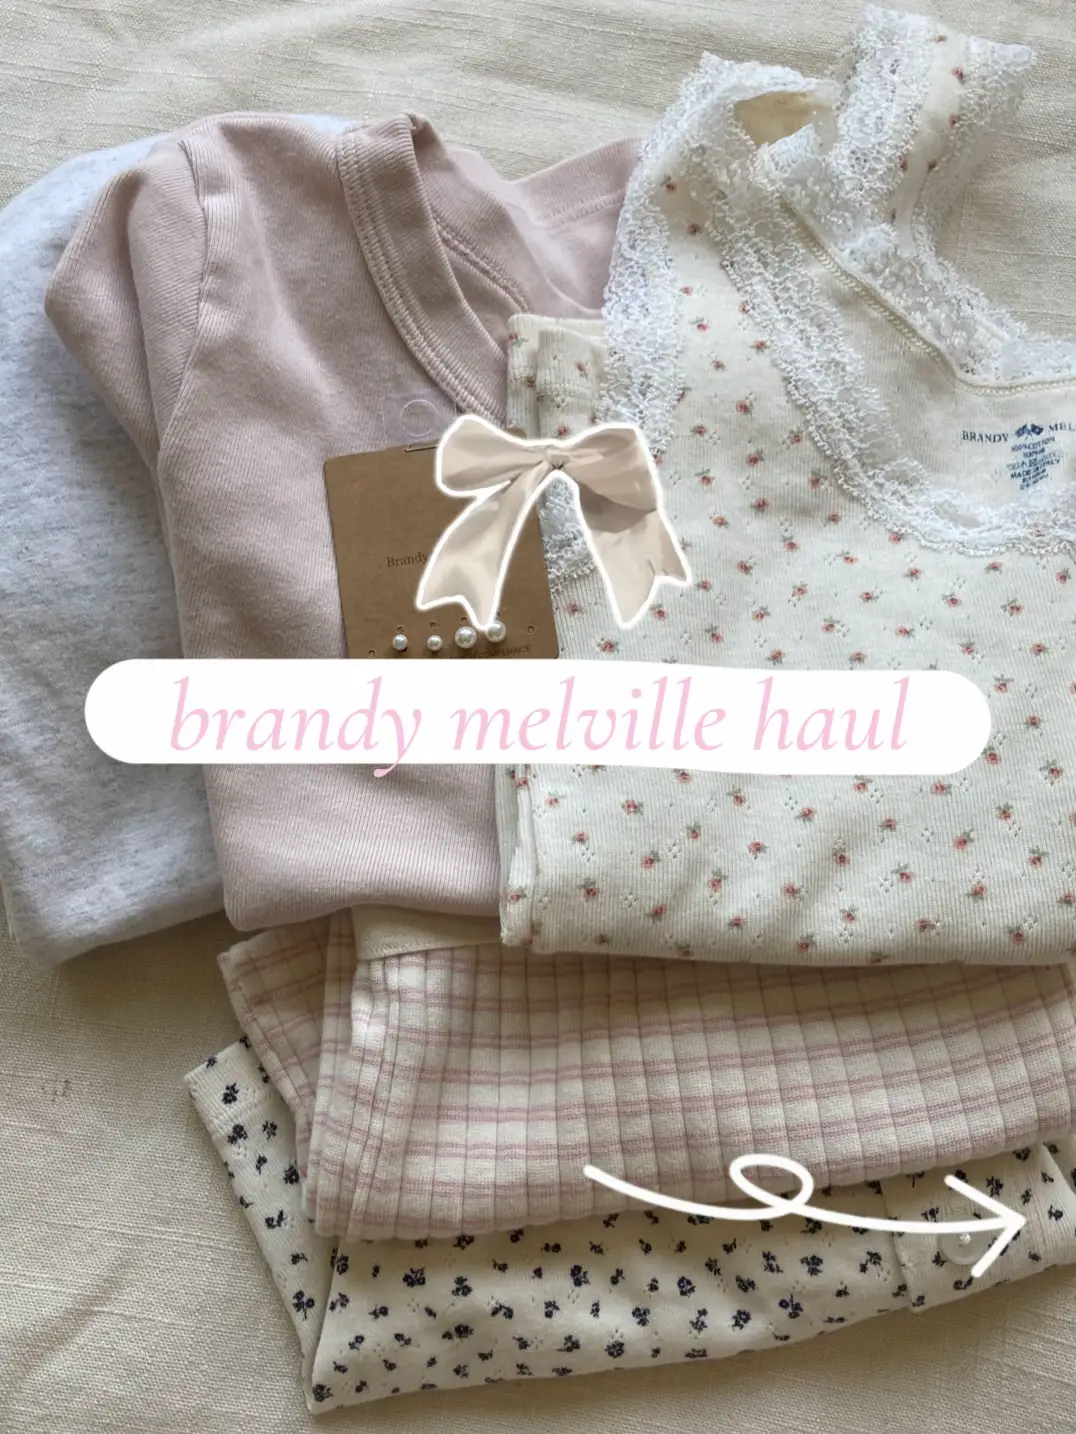 Which BM top is the best for layering under others? The weather's getting  colder and I want to change my wardrobe up :) : r/BrandyMelvilleClothes